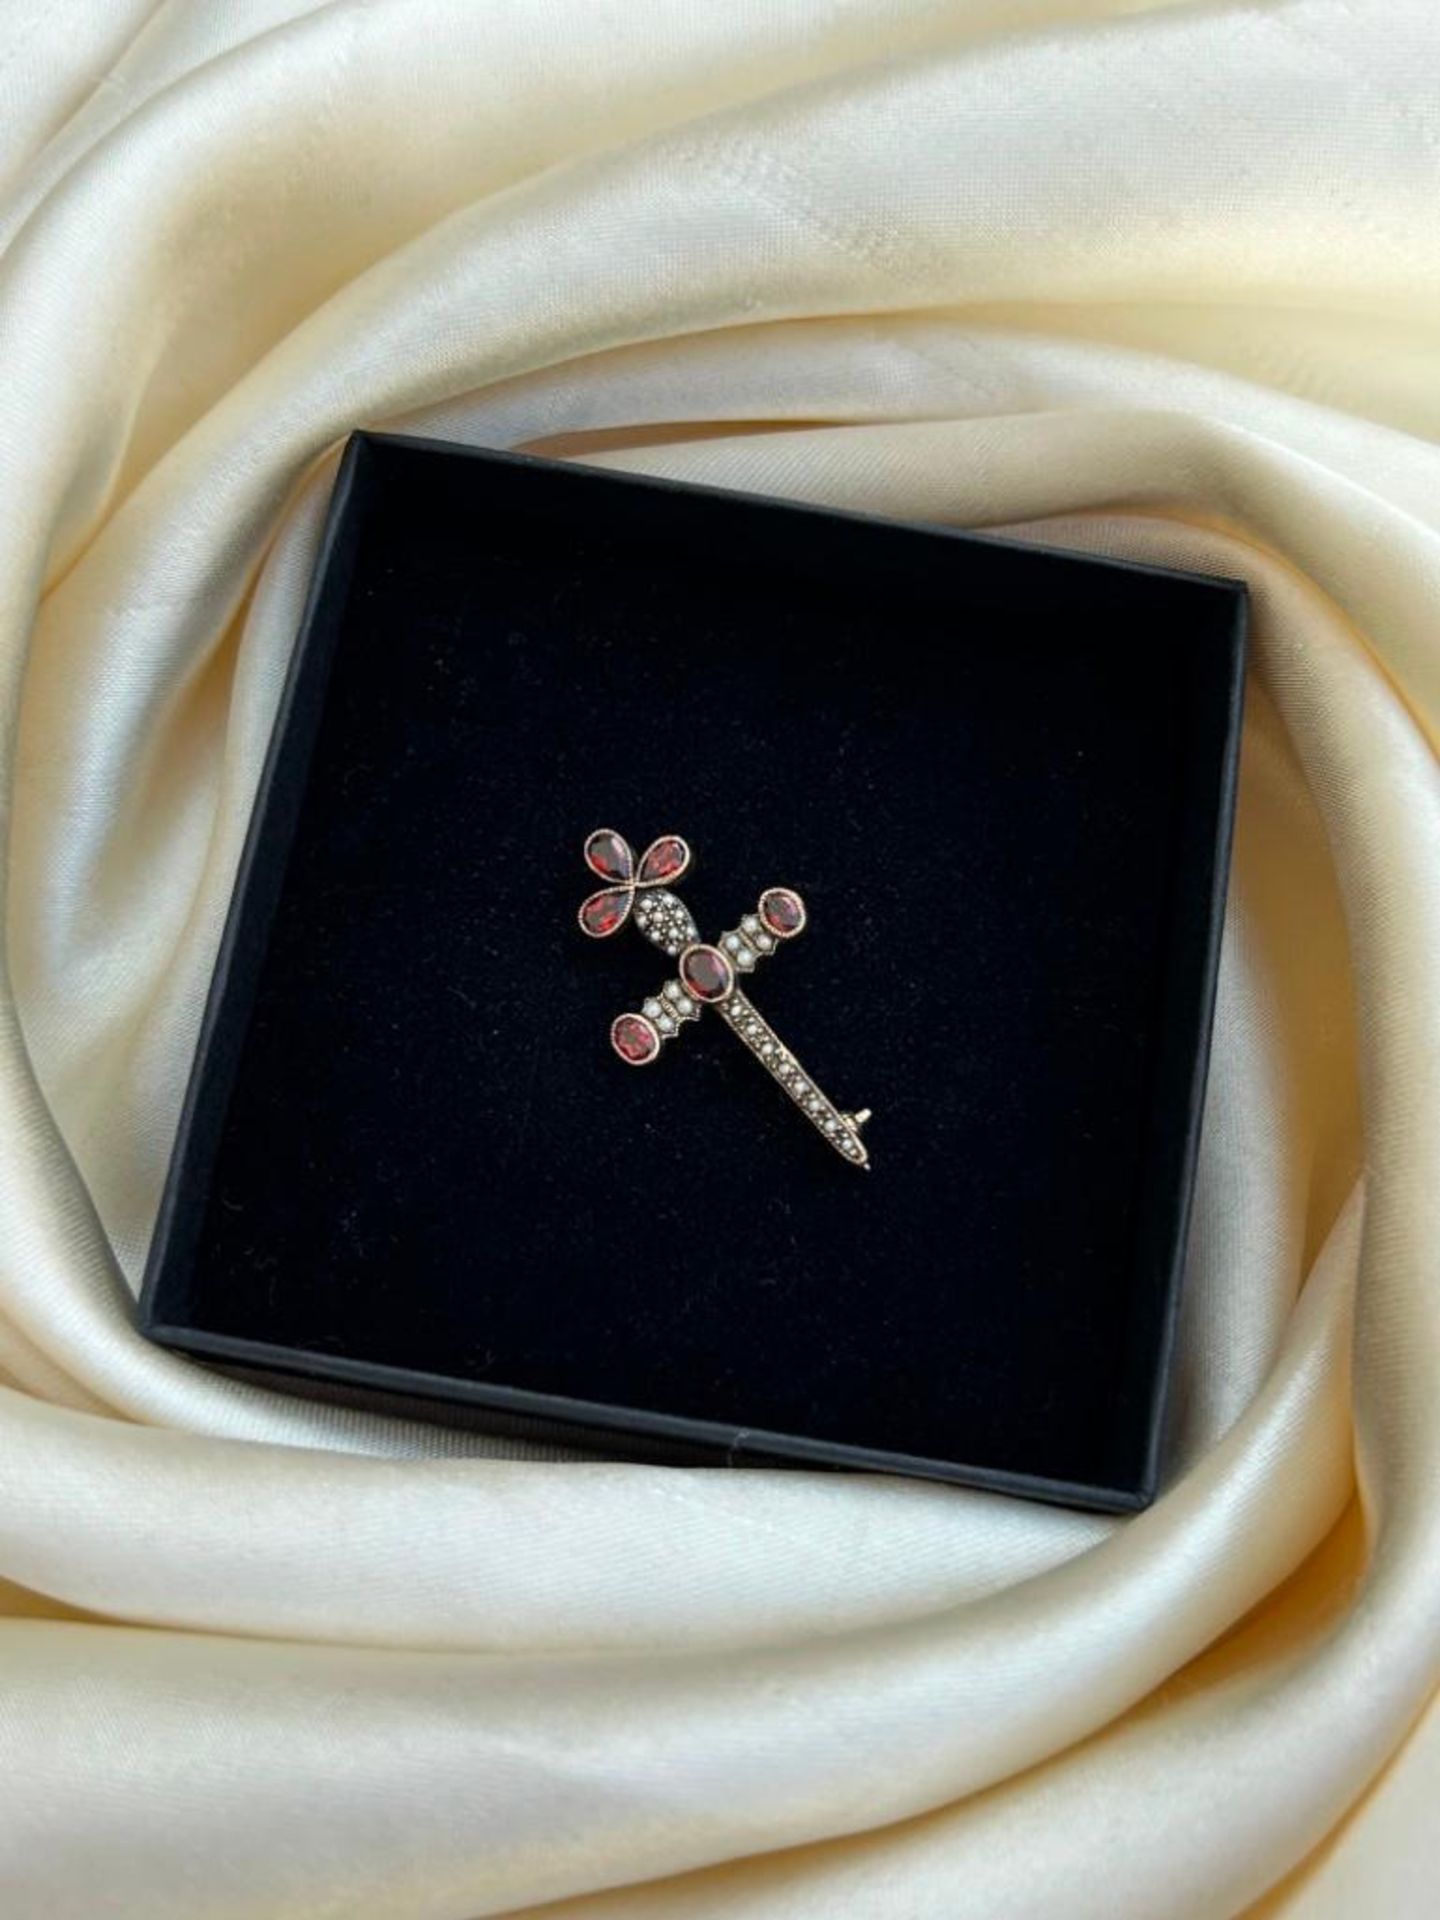 Antique Garnet and Pearl Cross Brooch in Gold - Image 3 of 6